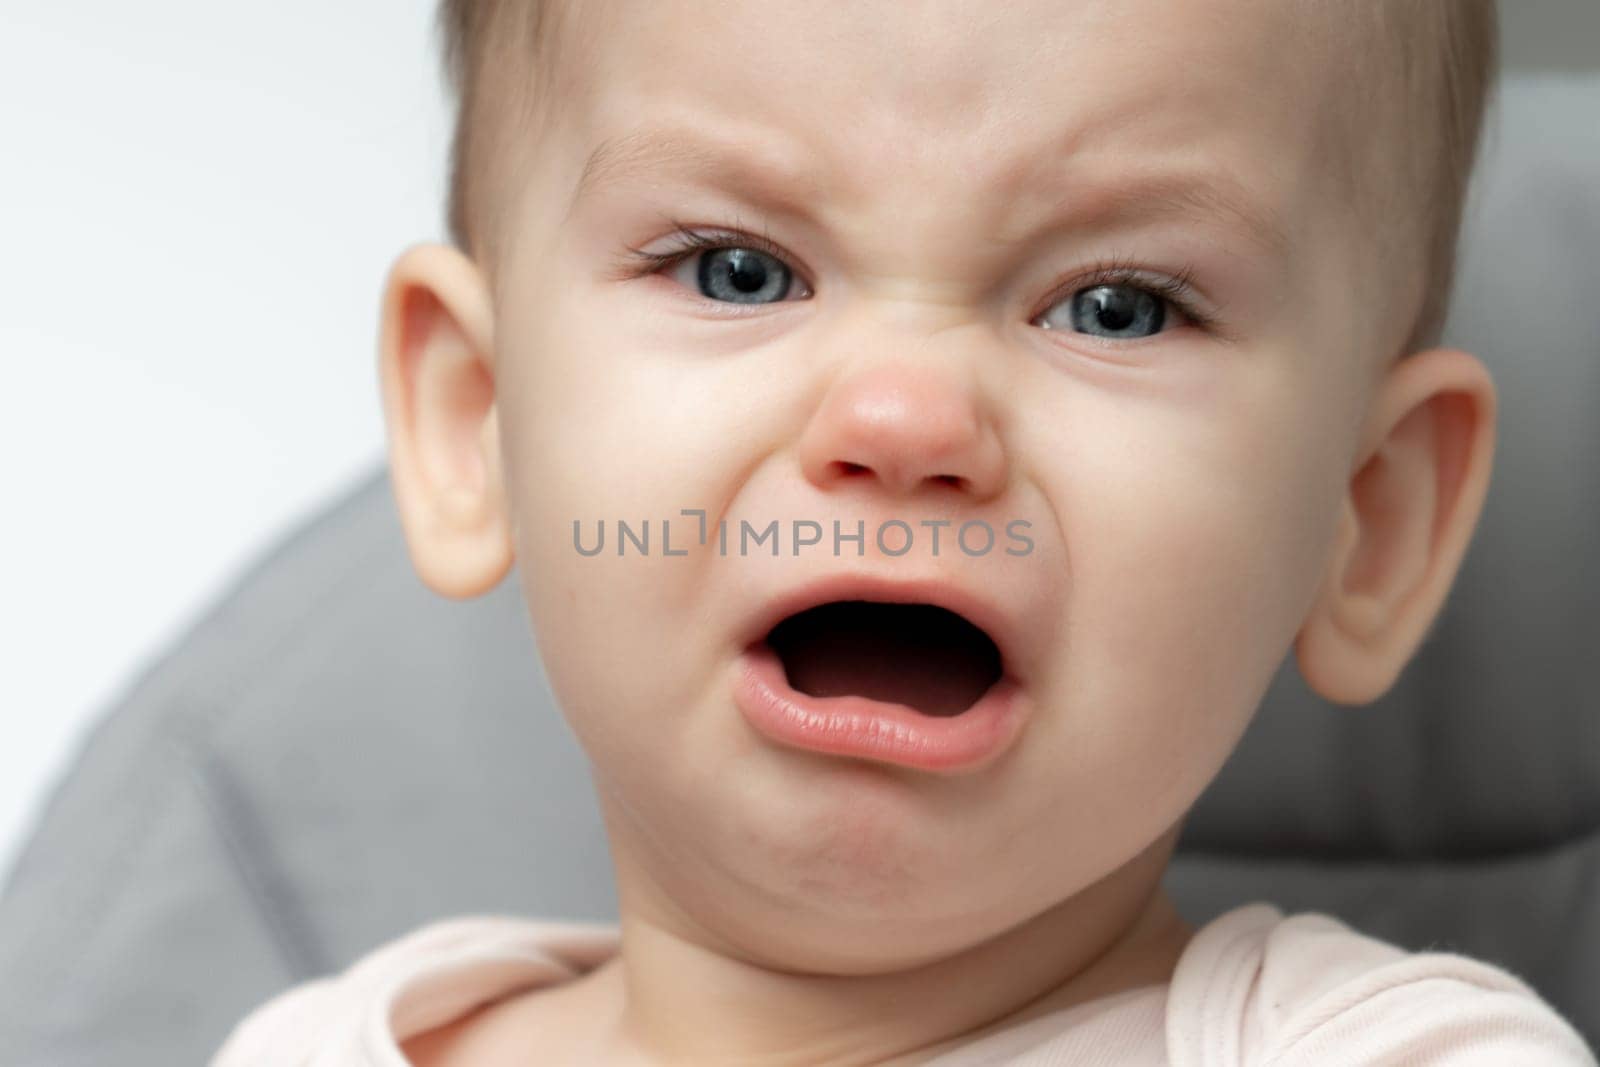 The closeup of an infant crying, showcasing the evident signs of being hungry and tired. Concept of the depth of parental love and the act of caring